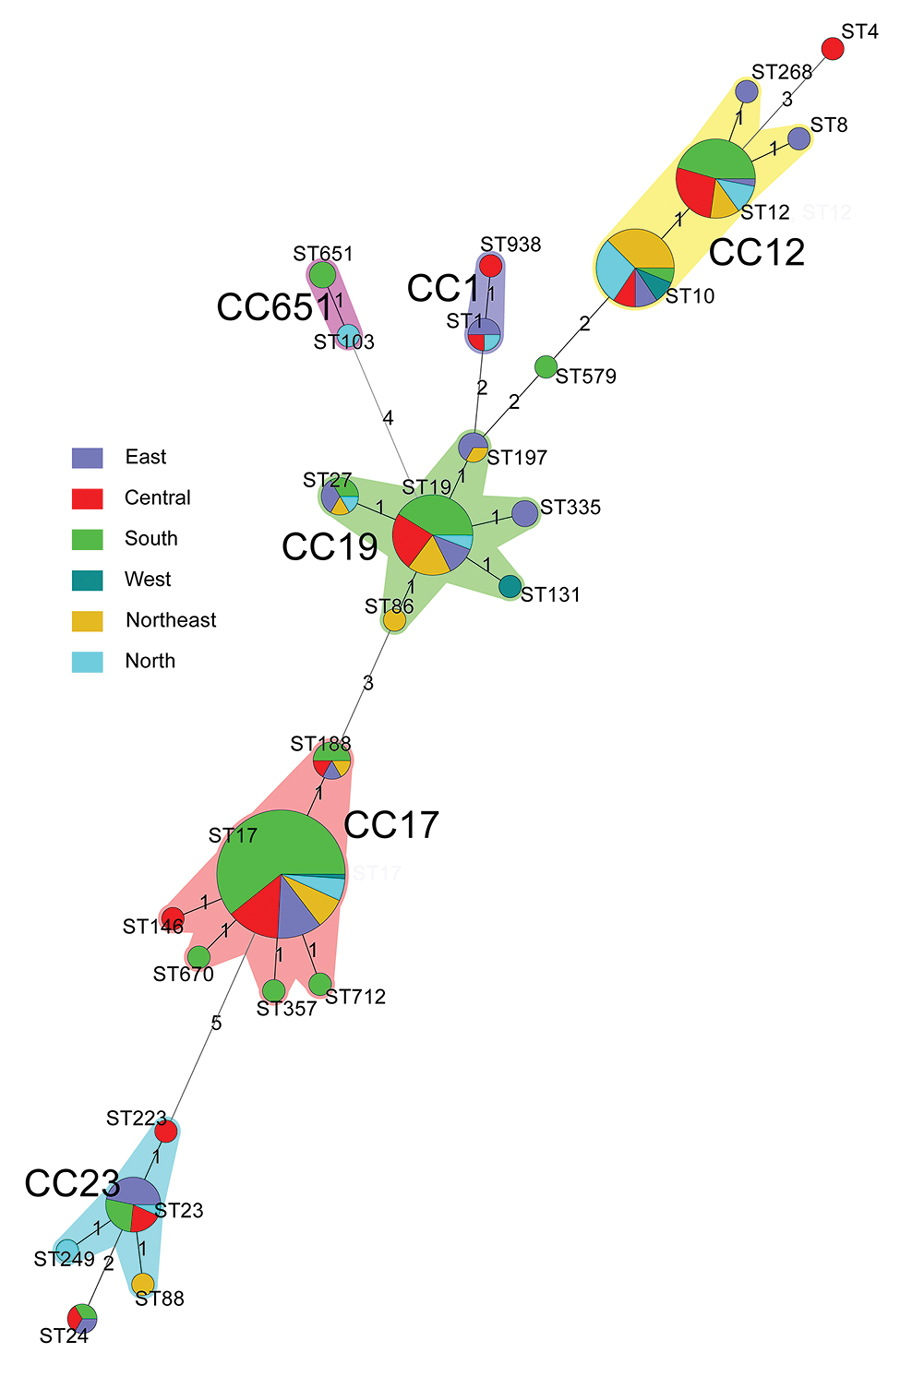 Minimum spanning tree analysis of invasive group B Streptococcus isolates showing the relationship between ST and CCs by region in China. Circles represent STs; size of each circle indicates the number of isolates within the specific type. The ST with the greatest number of single-locus variants is the founder ST. Regions appear as different colors; shading denotes STs belonging to the same CC. CC, clonal complex; ST, sequence type.